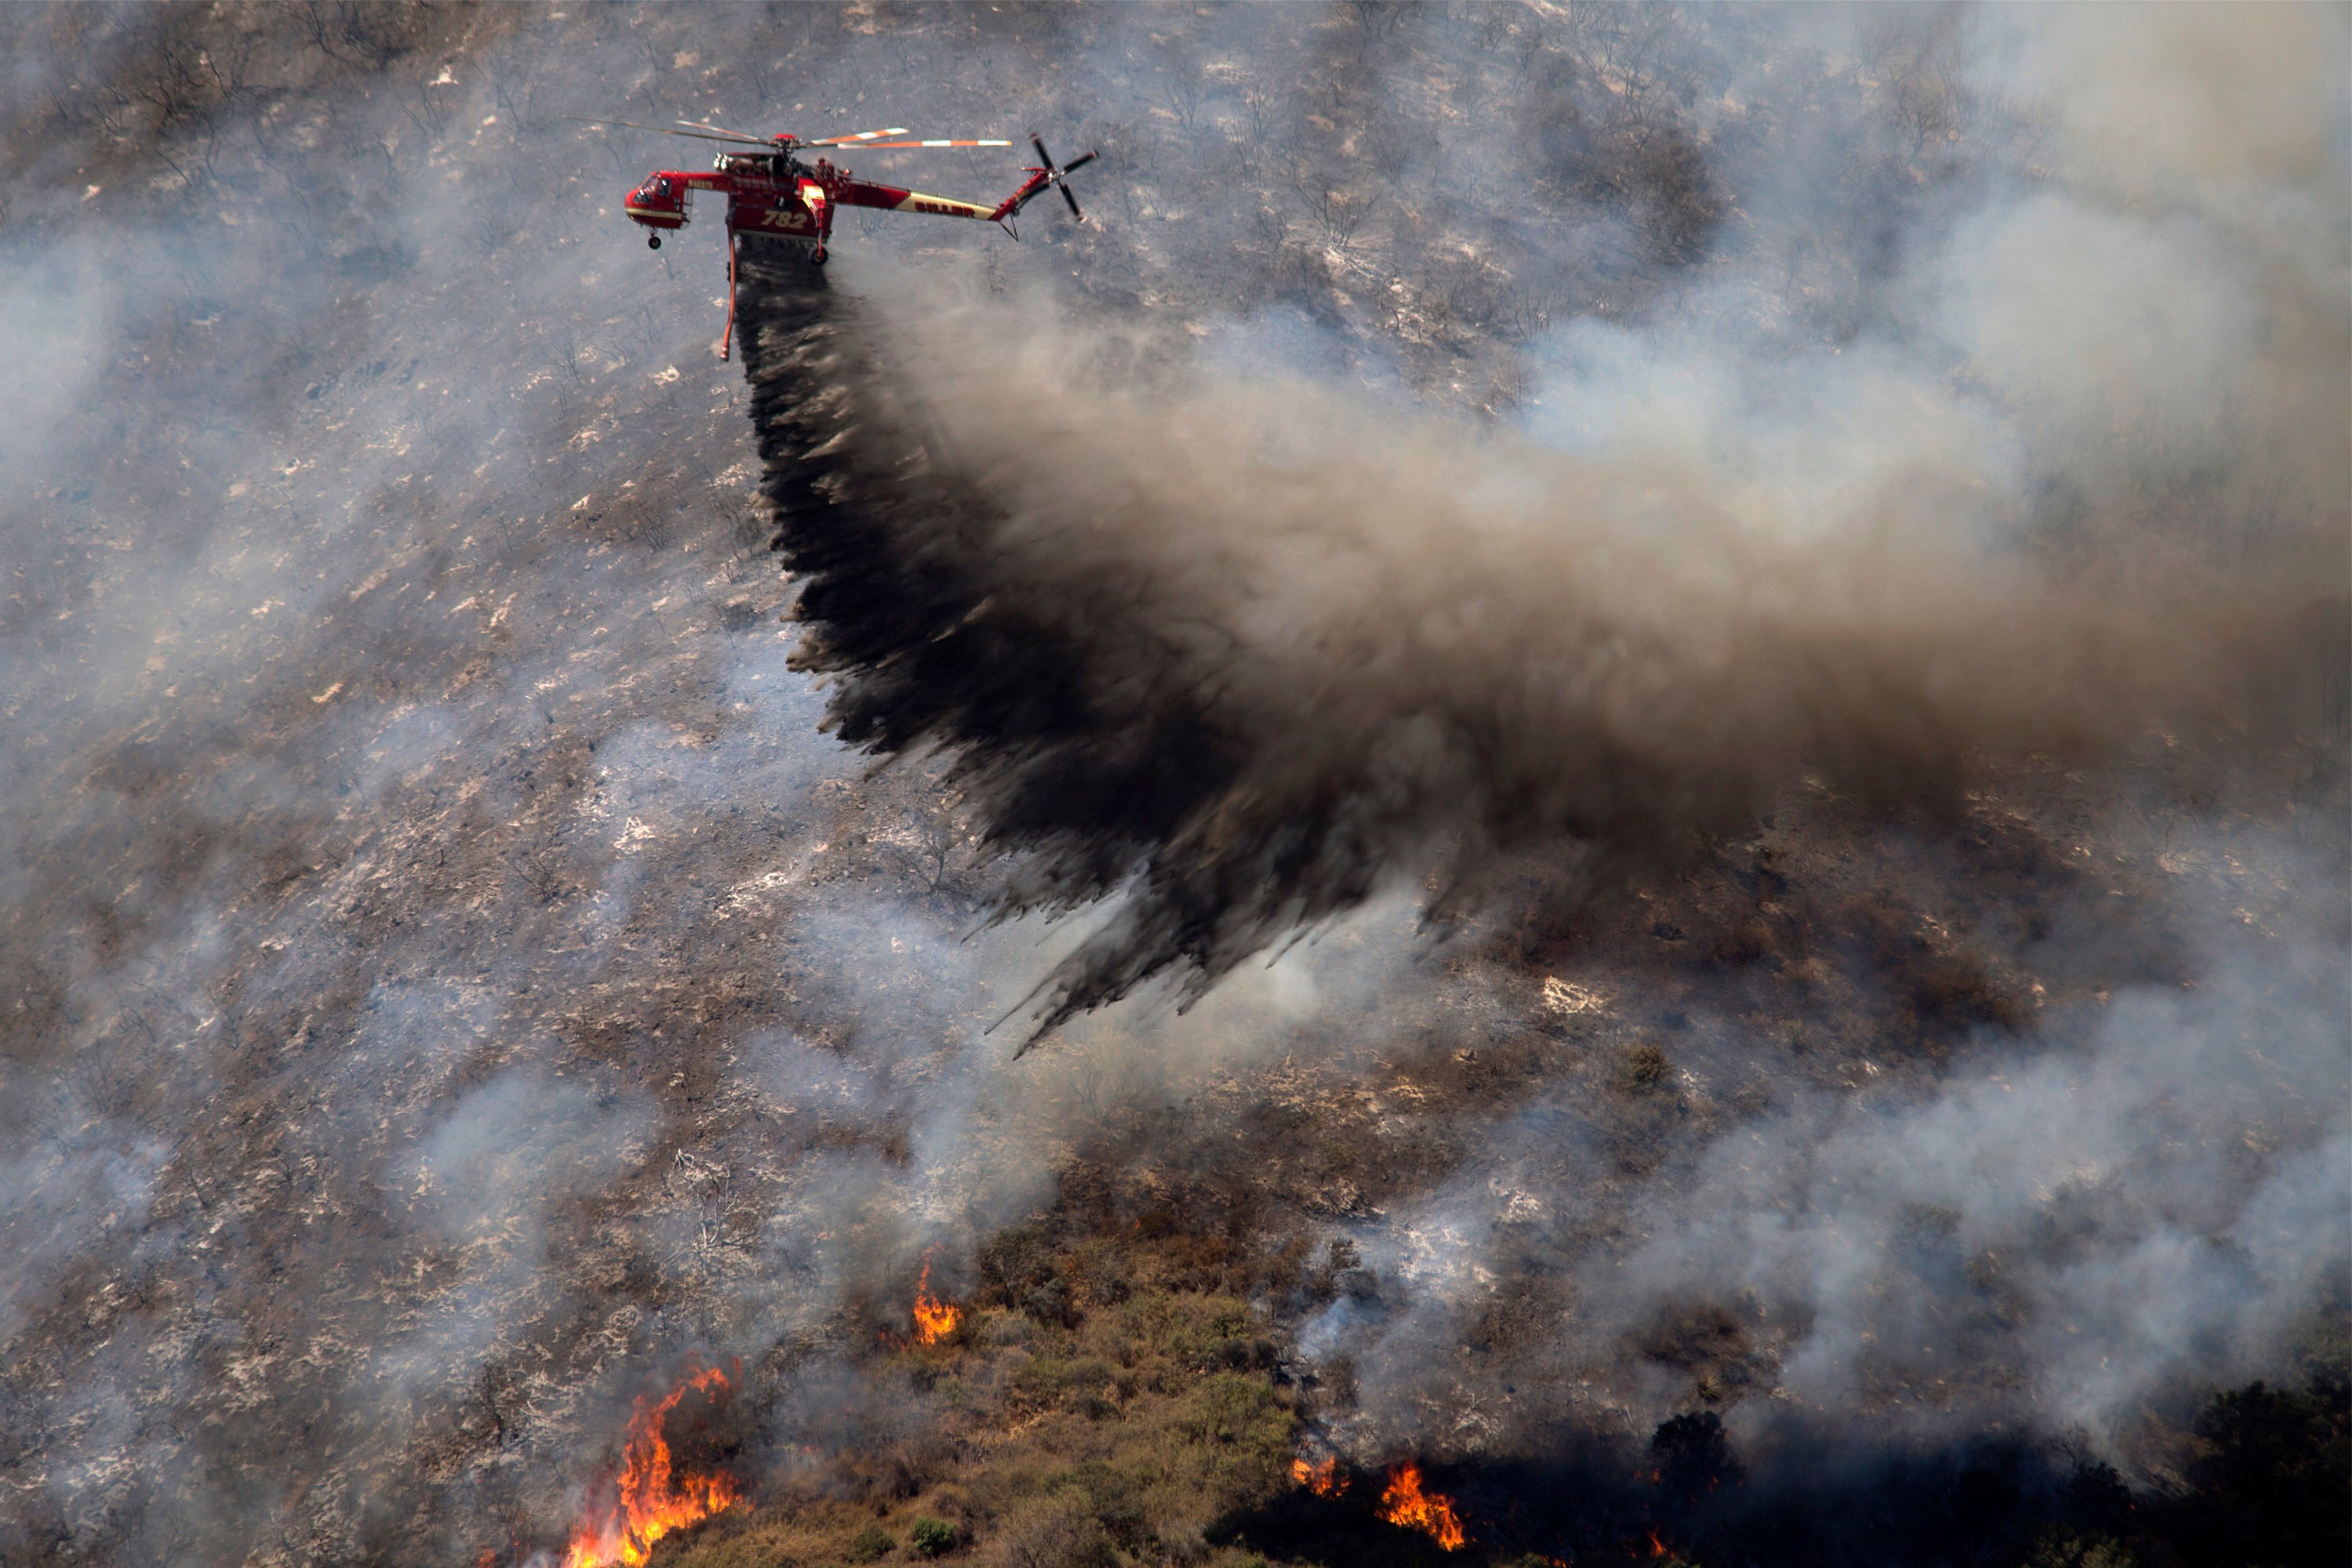 Blue Cut Fire Rages Through 30,000 Acres In Southern California